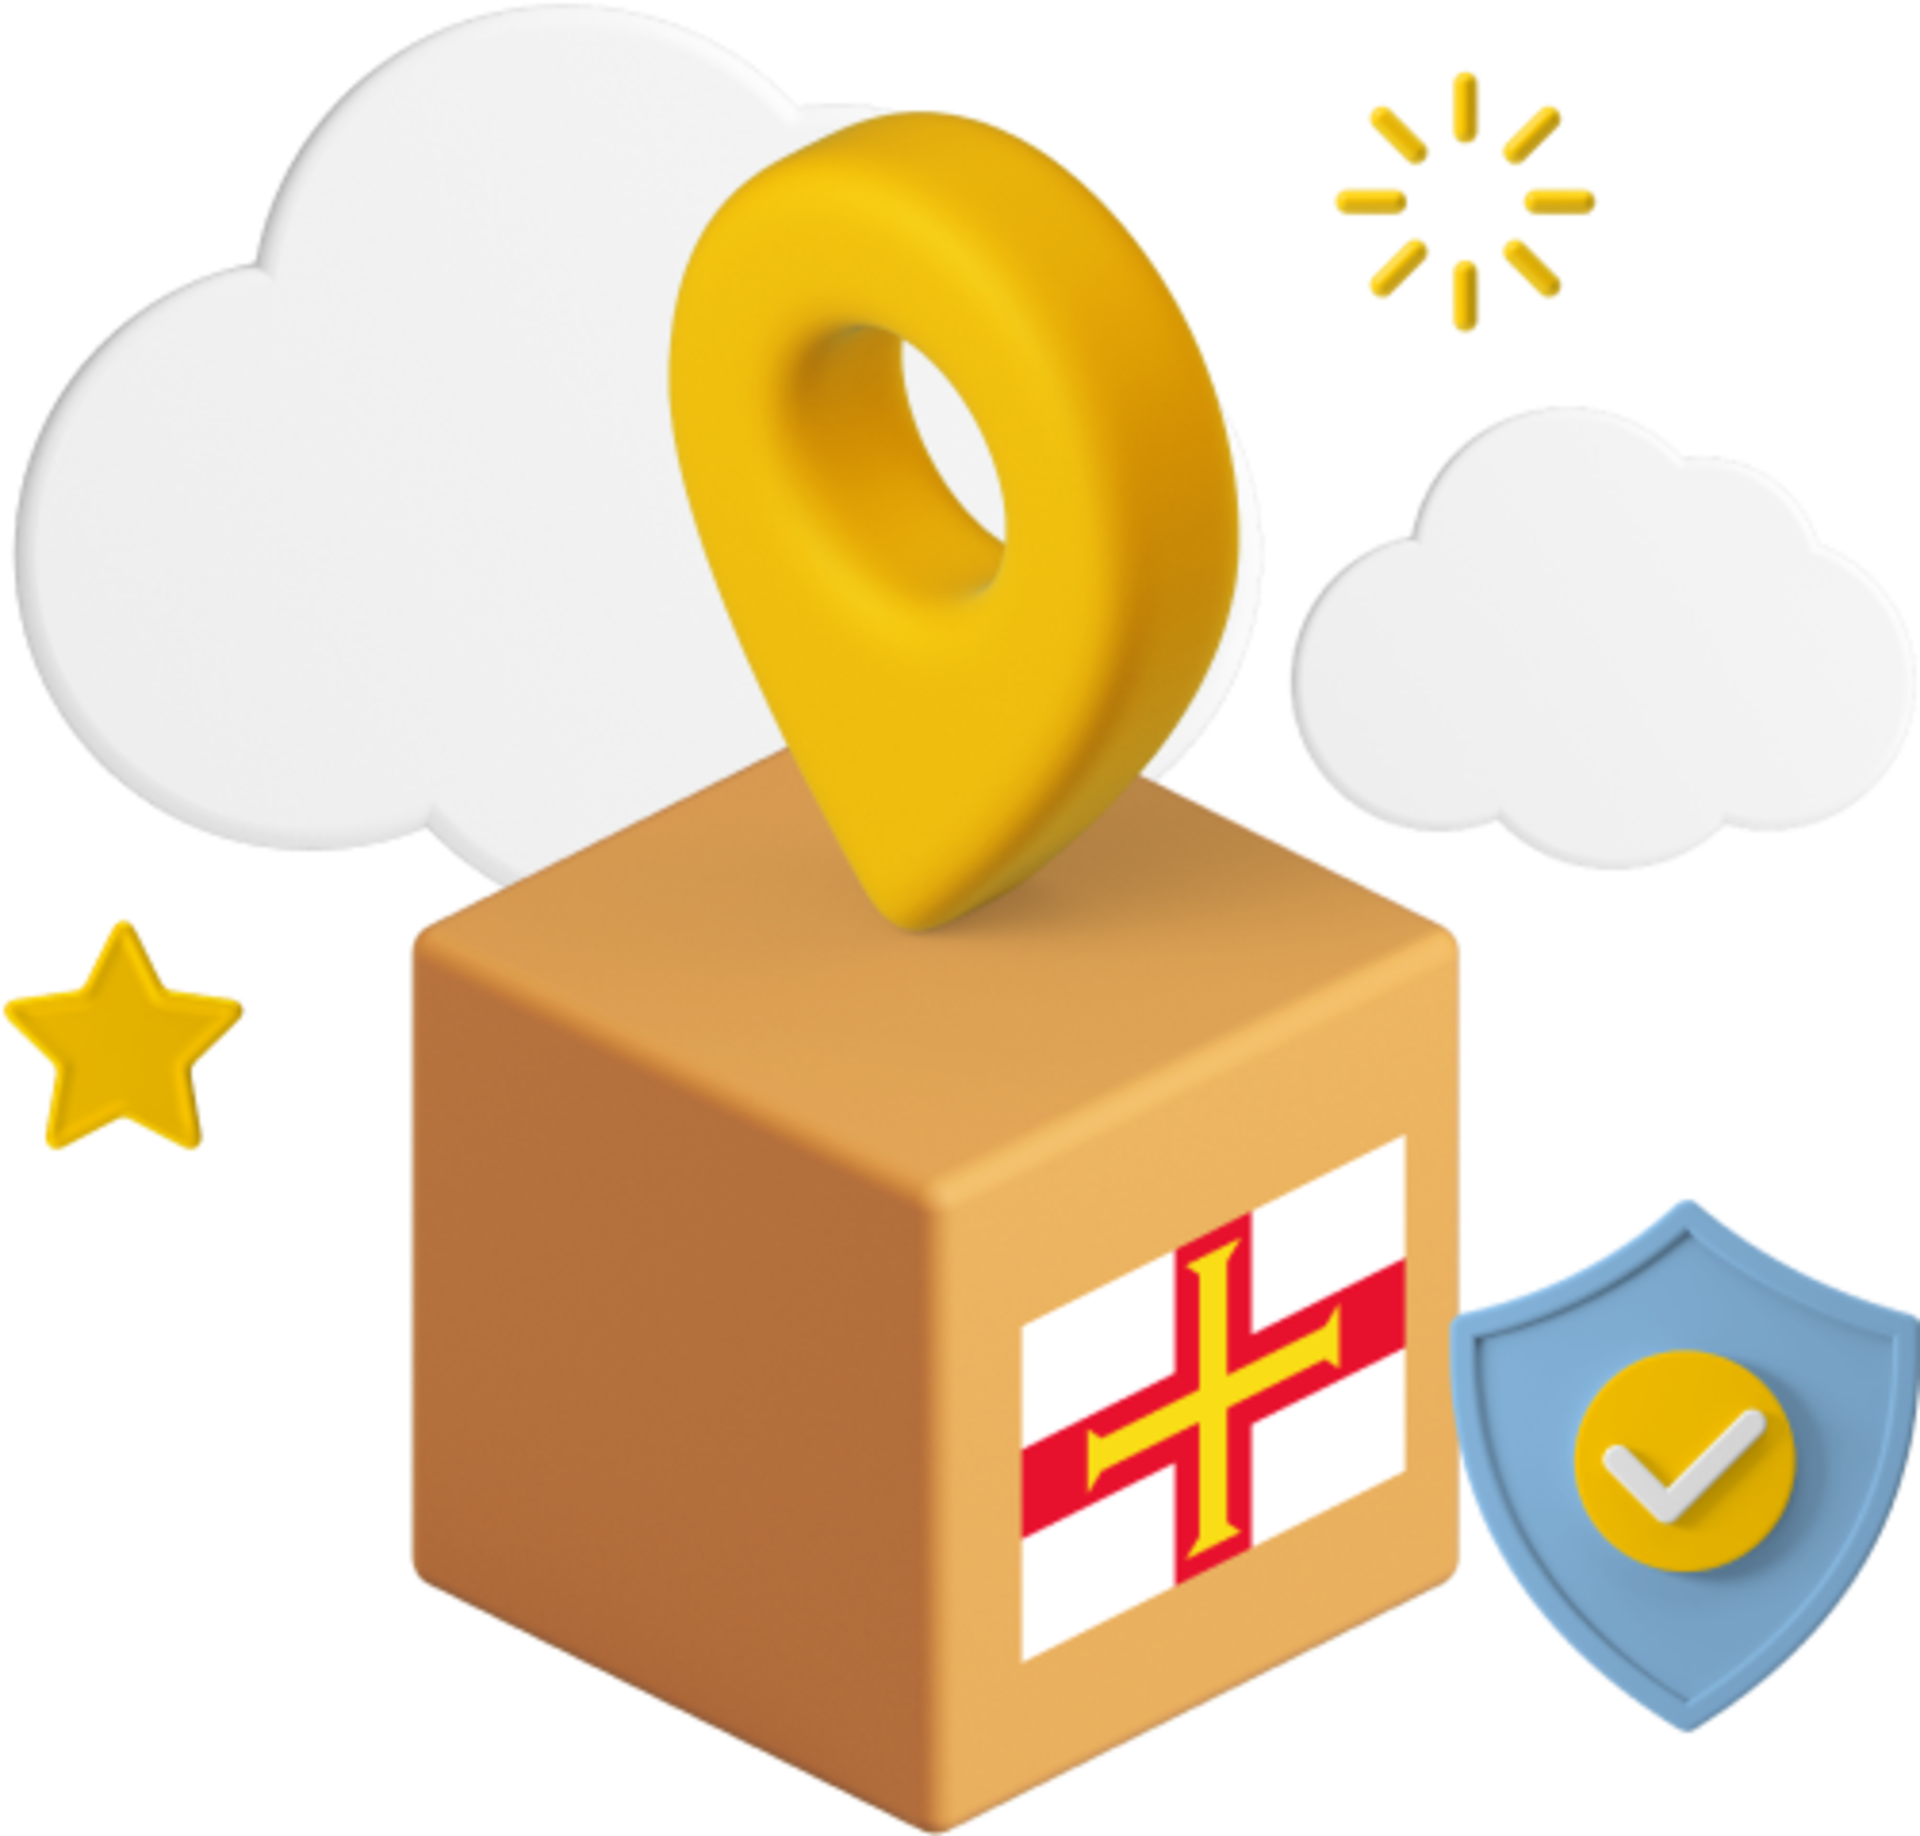 Guernsey flag on box with location icon